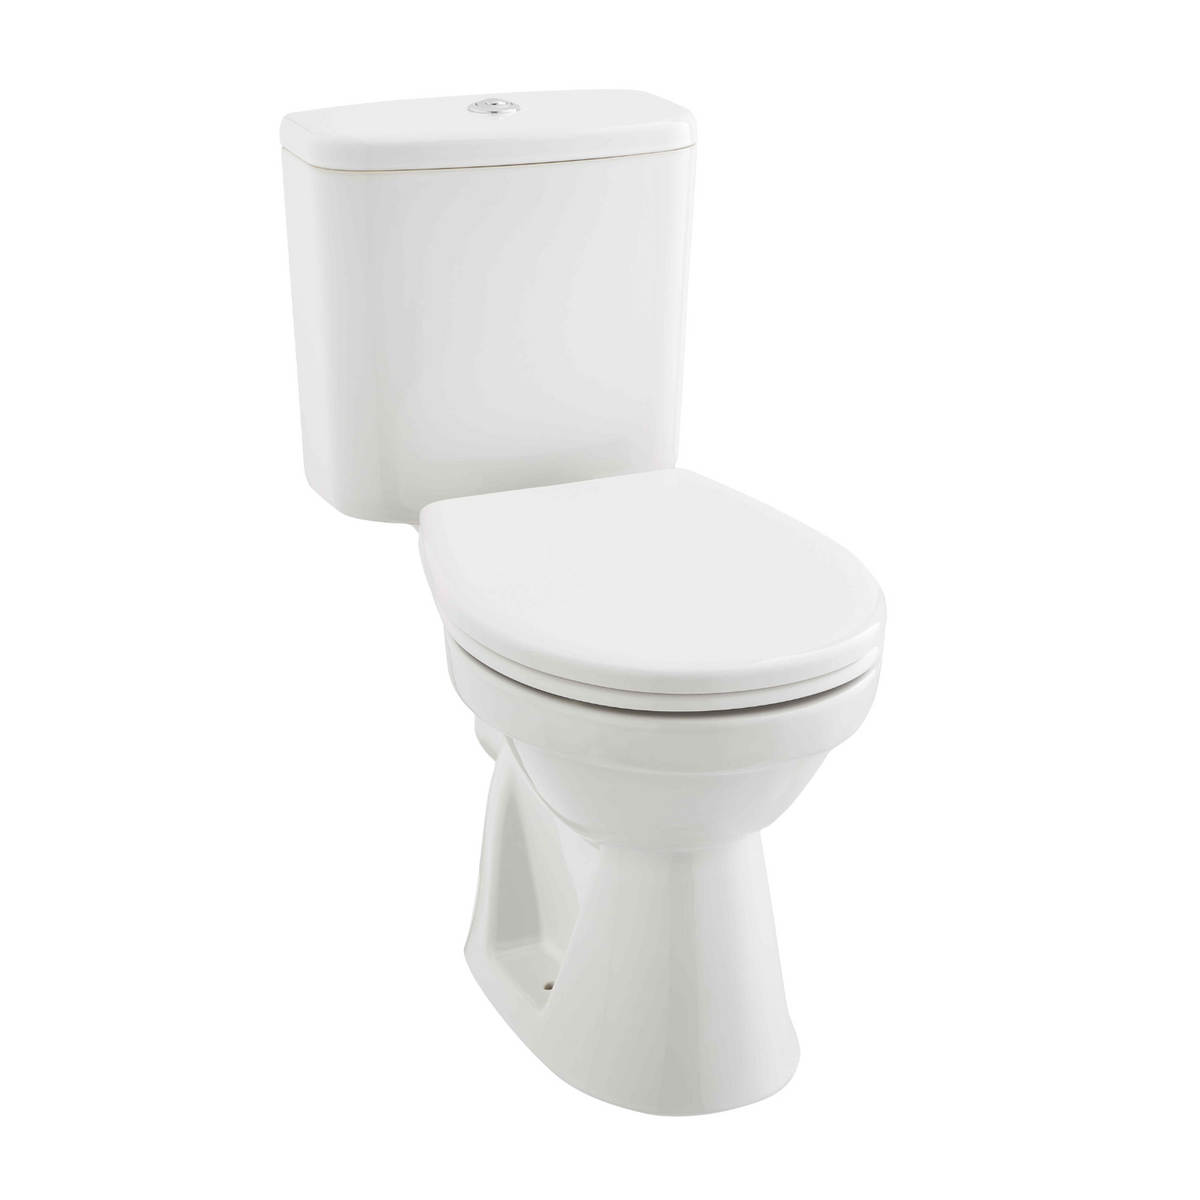 MILTON Bathroom Furniture Set - Complete Your Space with Fitted Bathroom Furniture